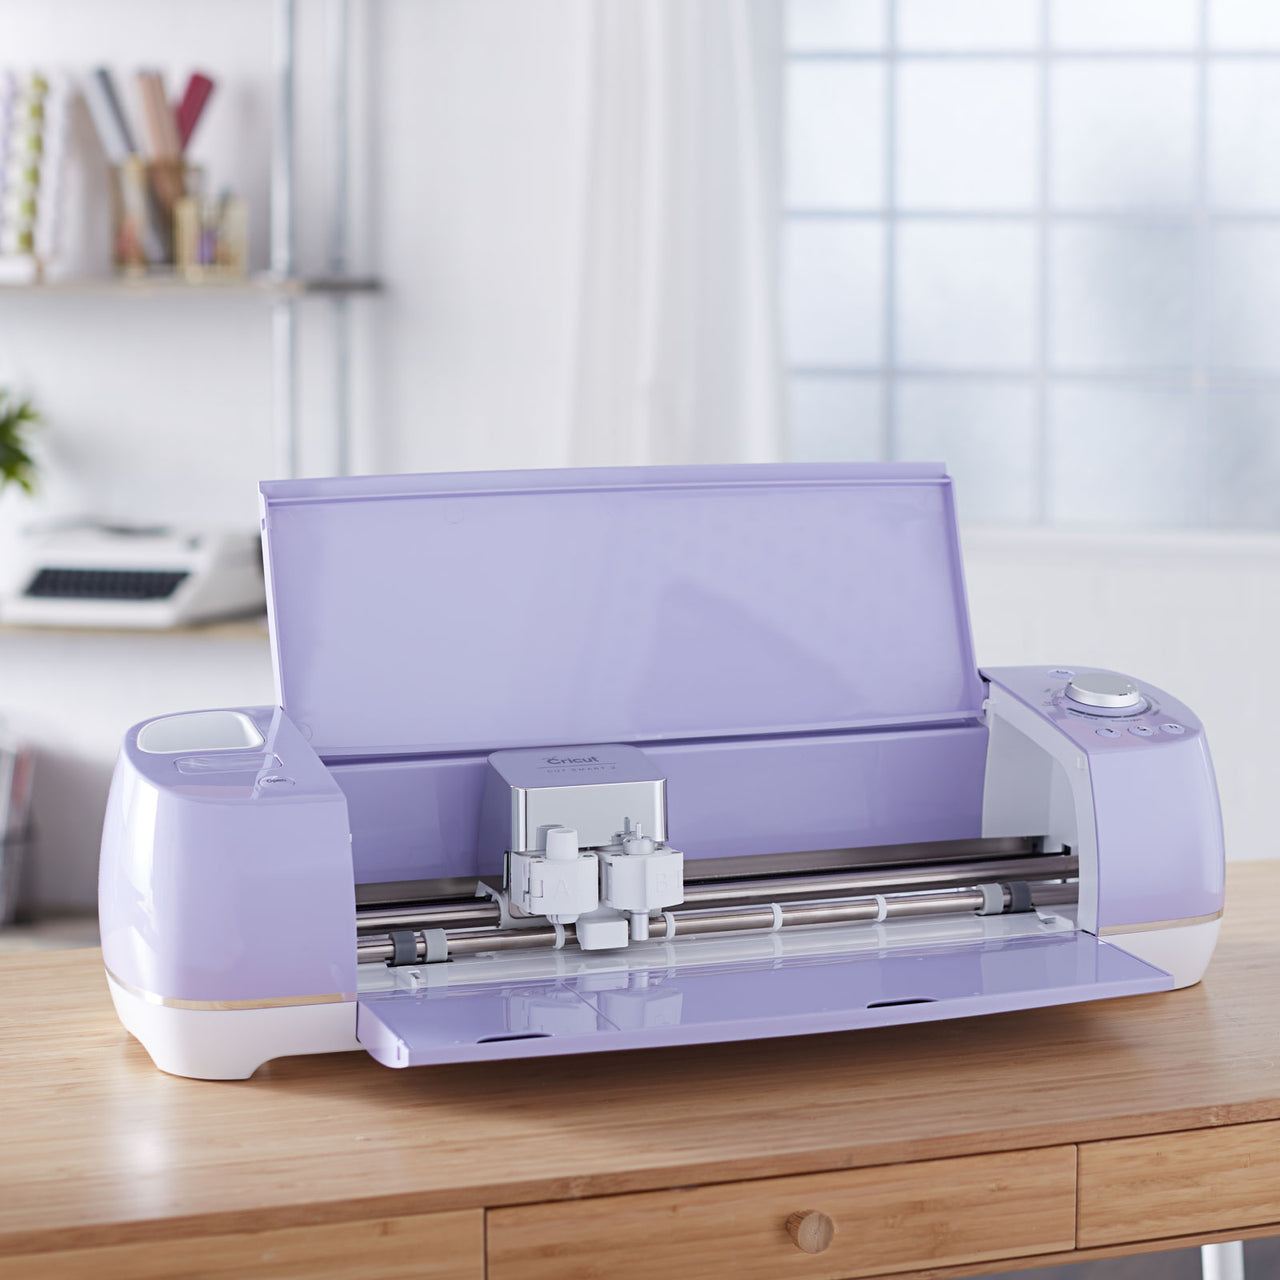 Cricut Explore Air 2 with Everyday Iron-On Samplers, Vinyl Rolls, Essential Tool Set and Portable Trimmer Bundle